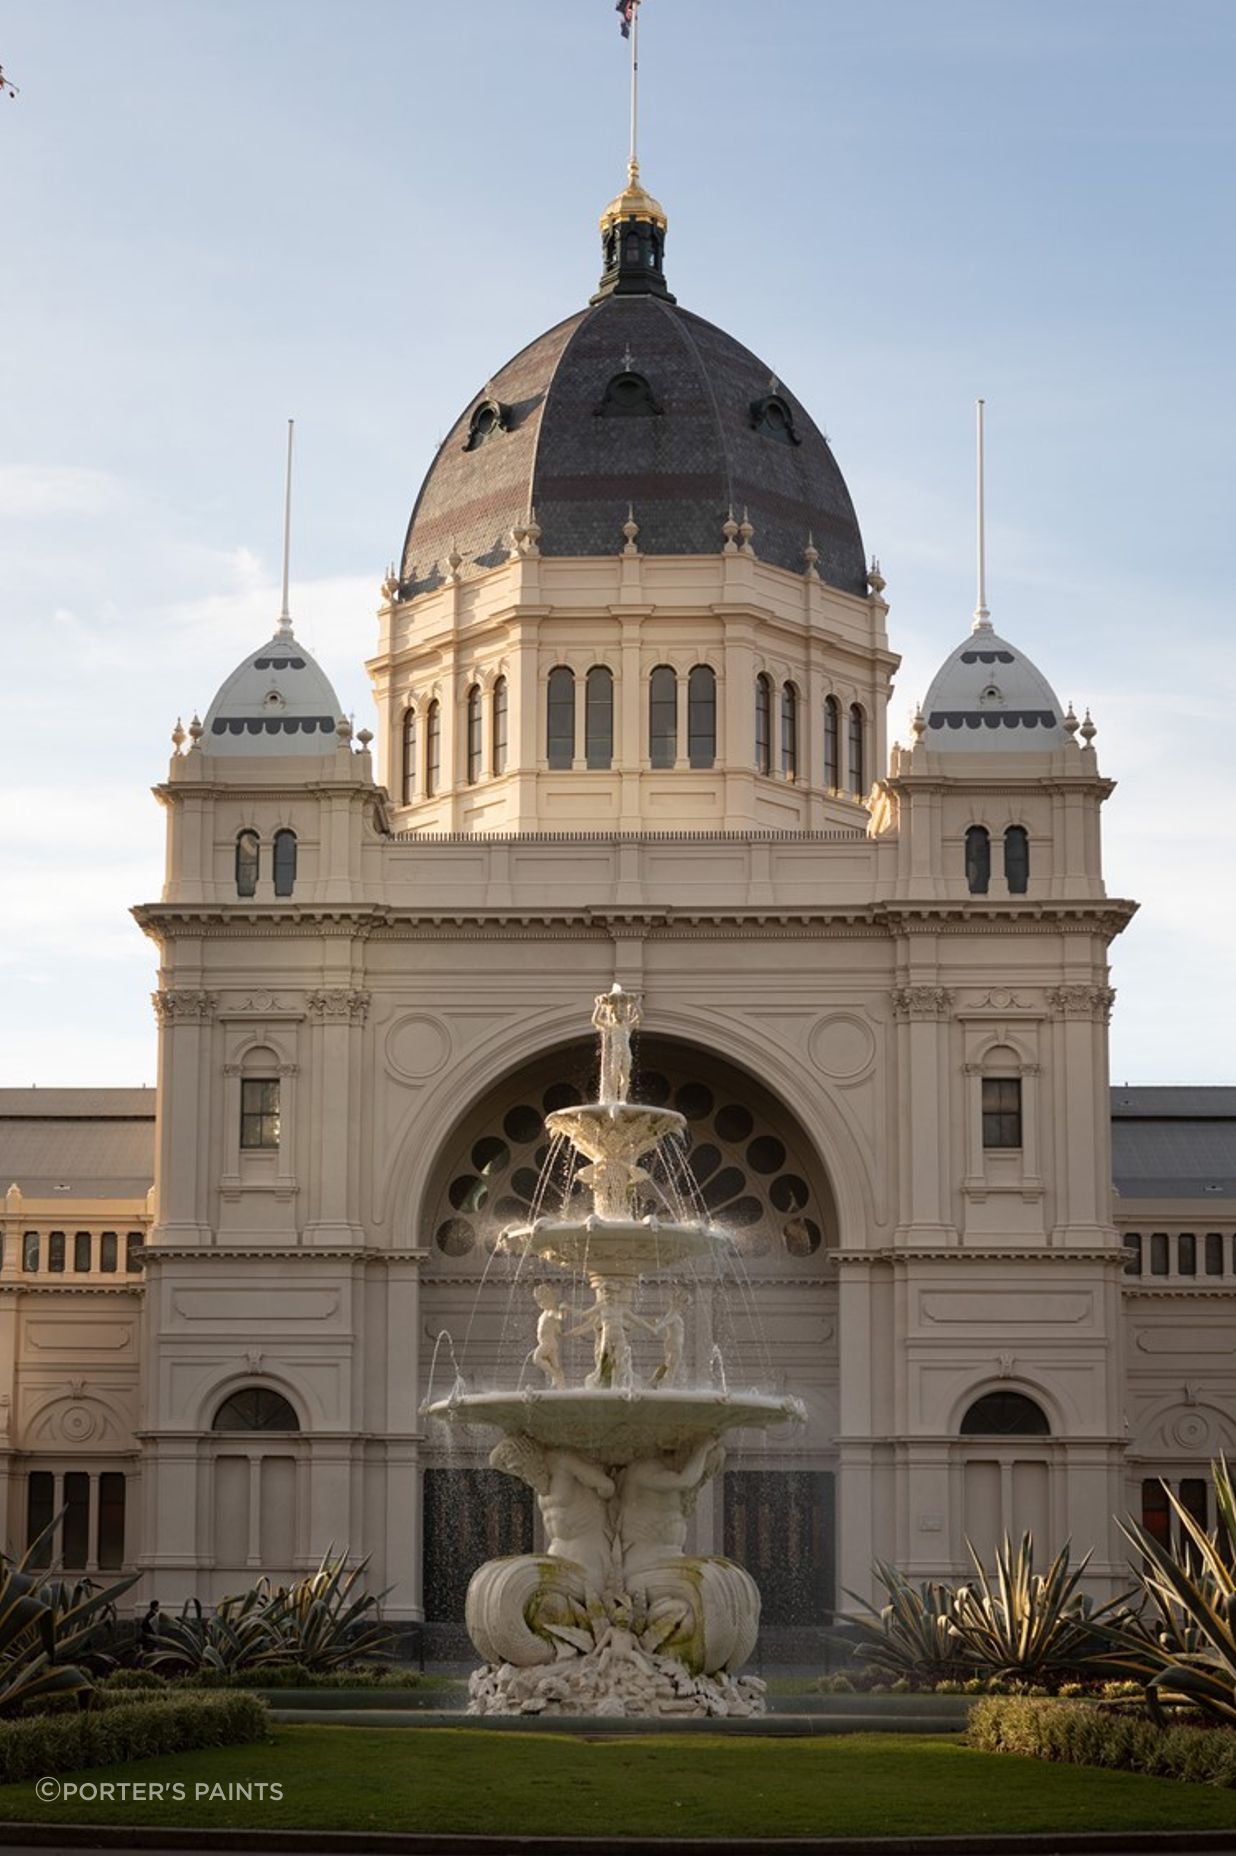 The Royal Exhibition Building in Melbourne has used Porter's Paints Mineral Paint.